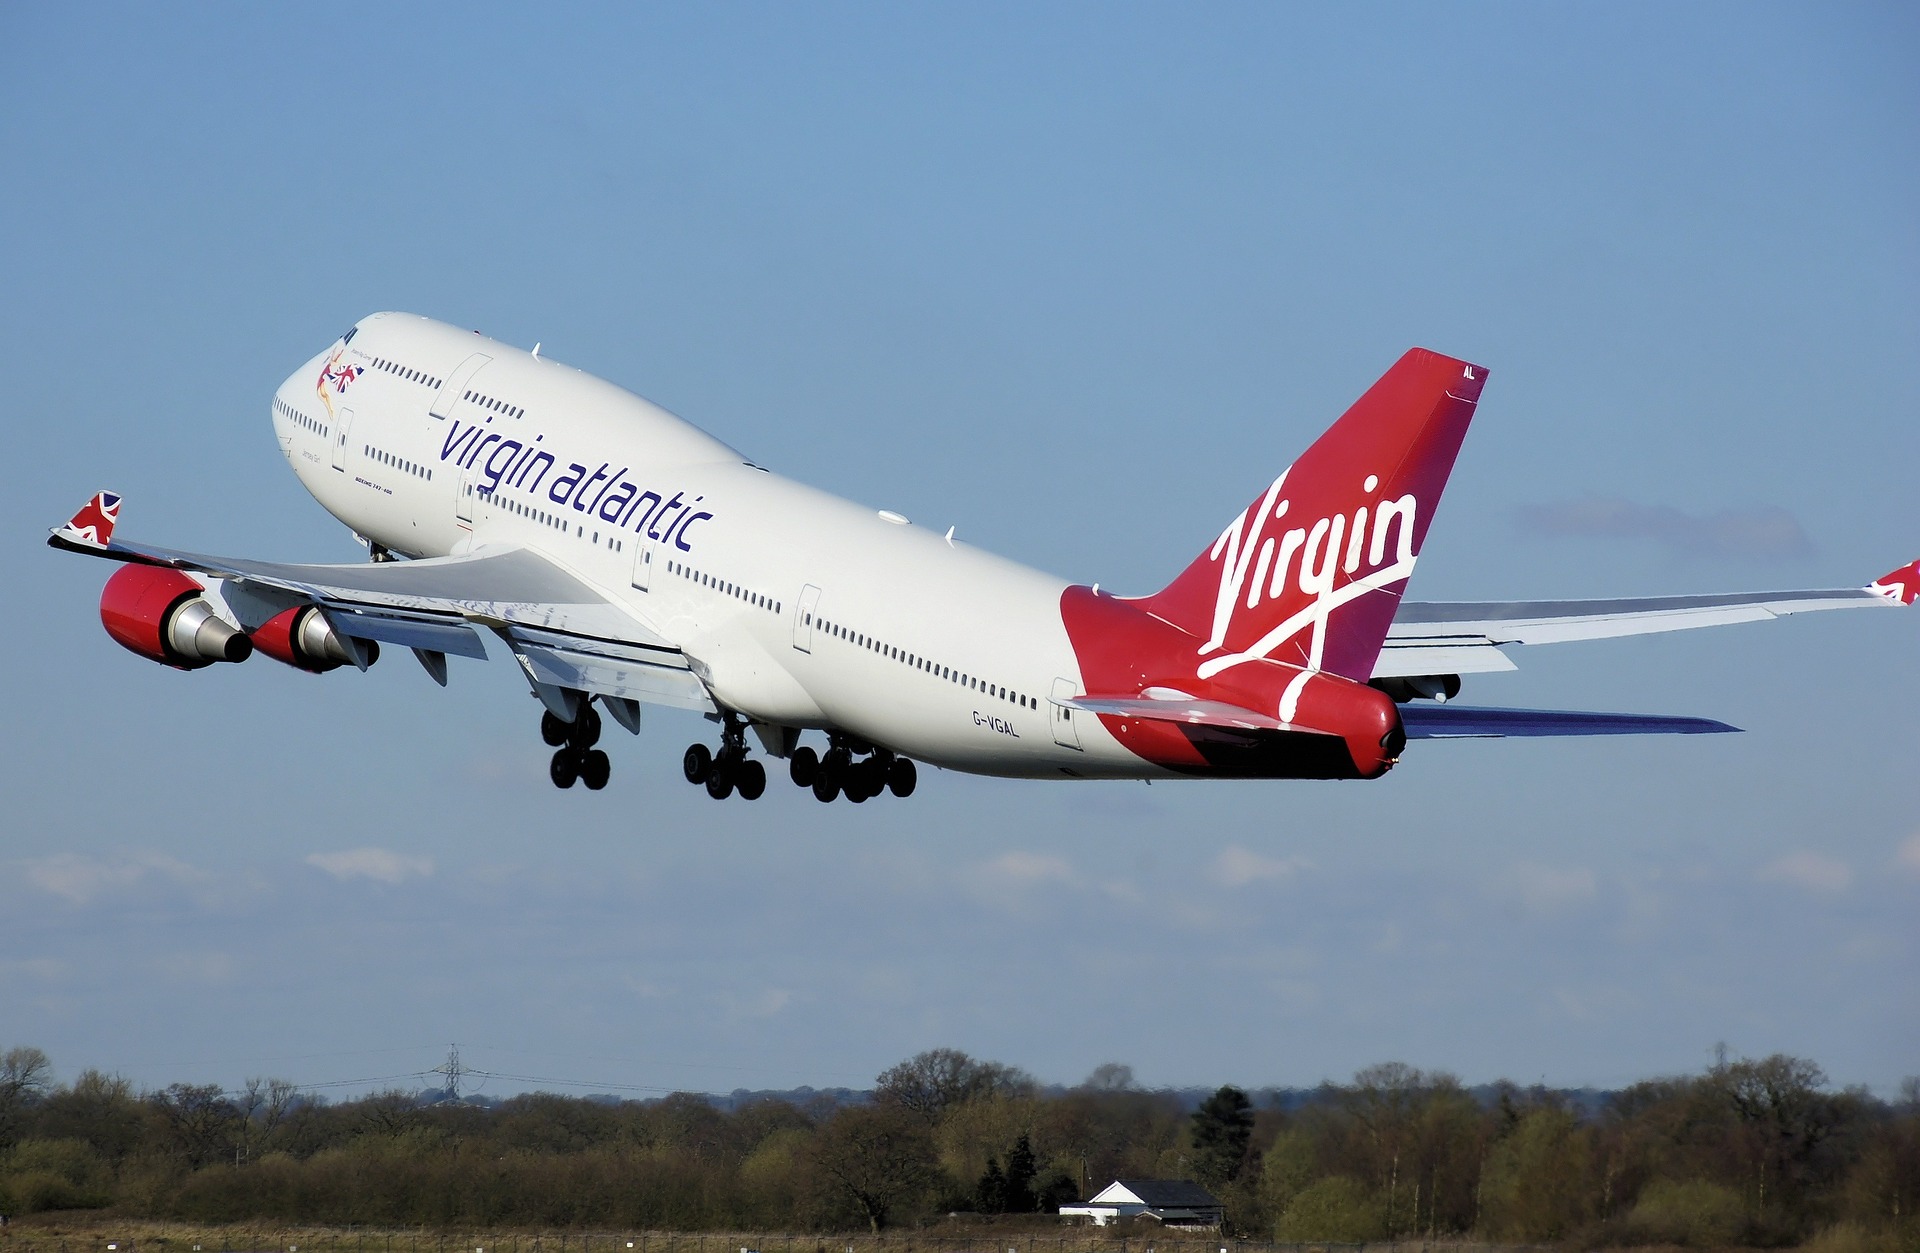 Virgin Atlantic Zeros Out All Frequent Flyer Accounts